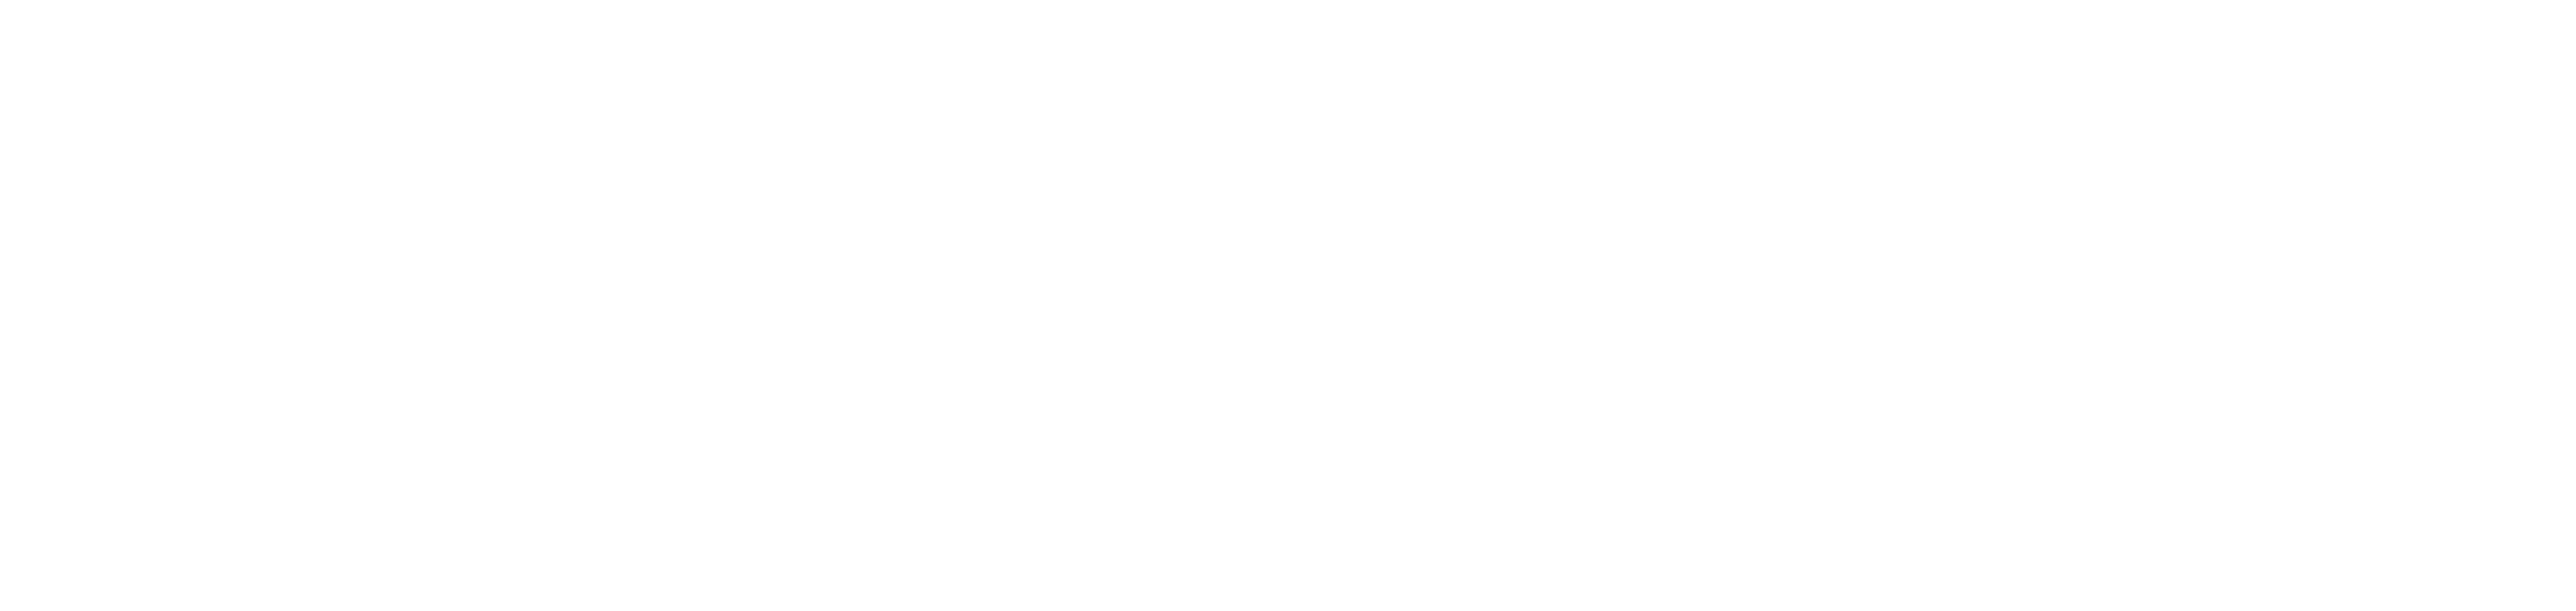 The Prancing Pony Podcast